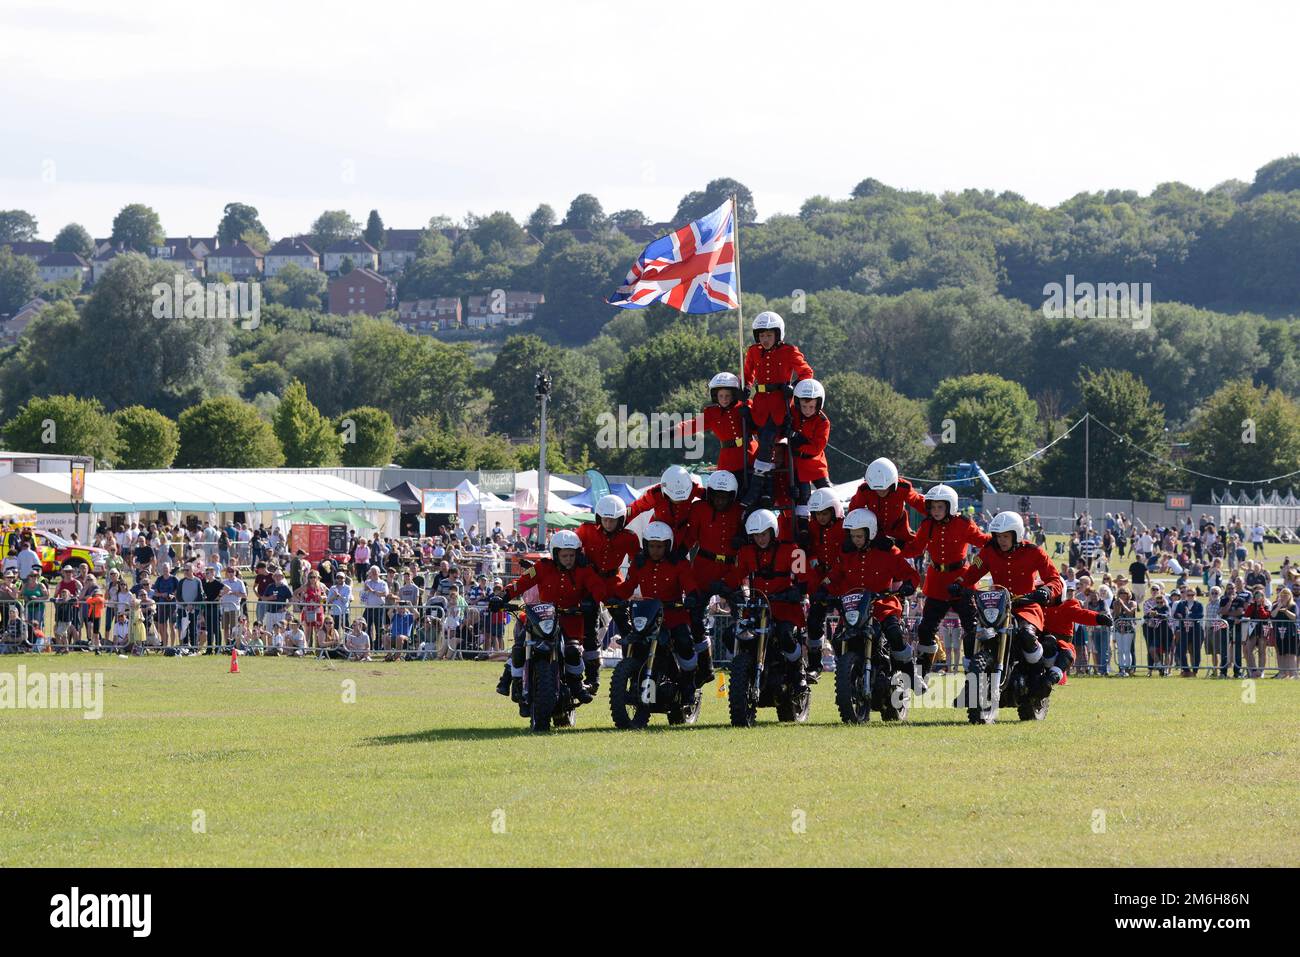 IMPS Motorcycle Display Team in Aktion beim Armed Forces Day 2019, Salisbury - Hudson's Field, 30. Juni 2019 Stockfoto